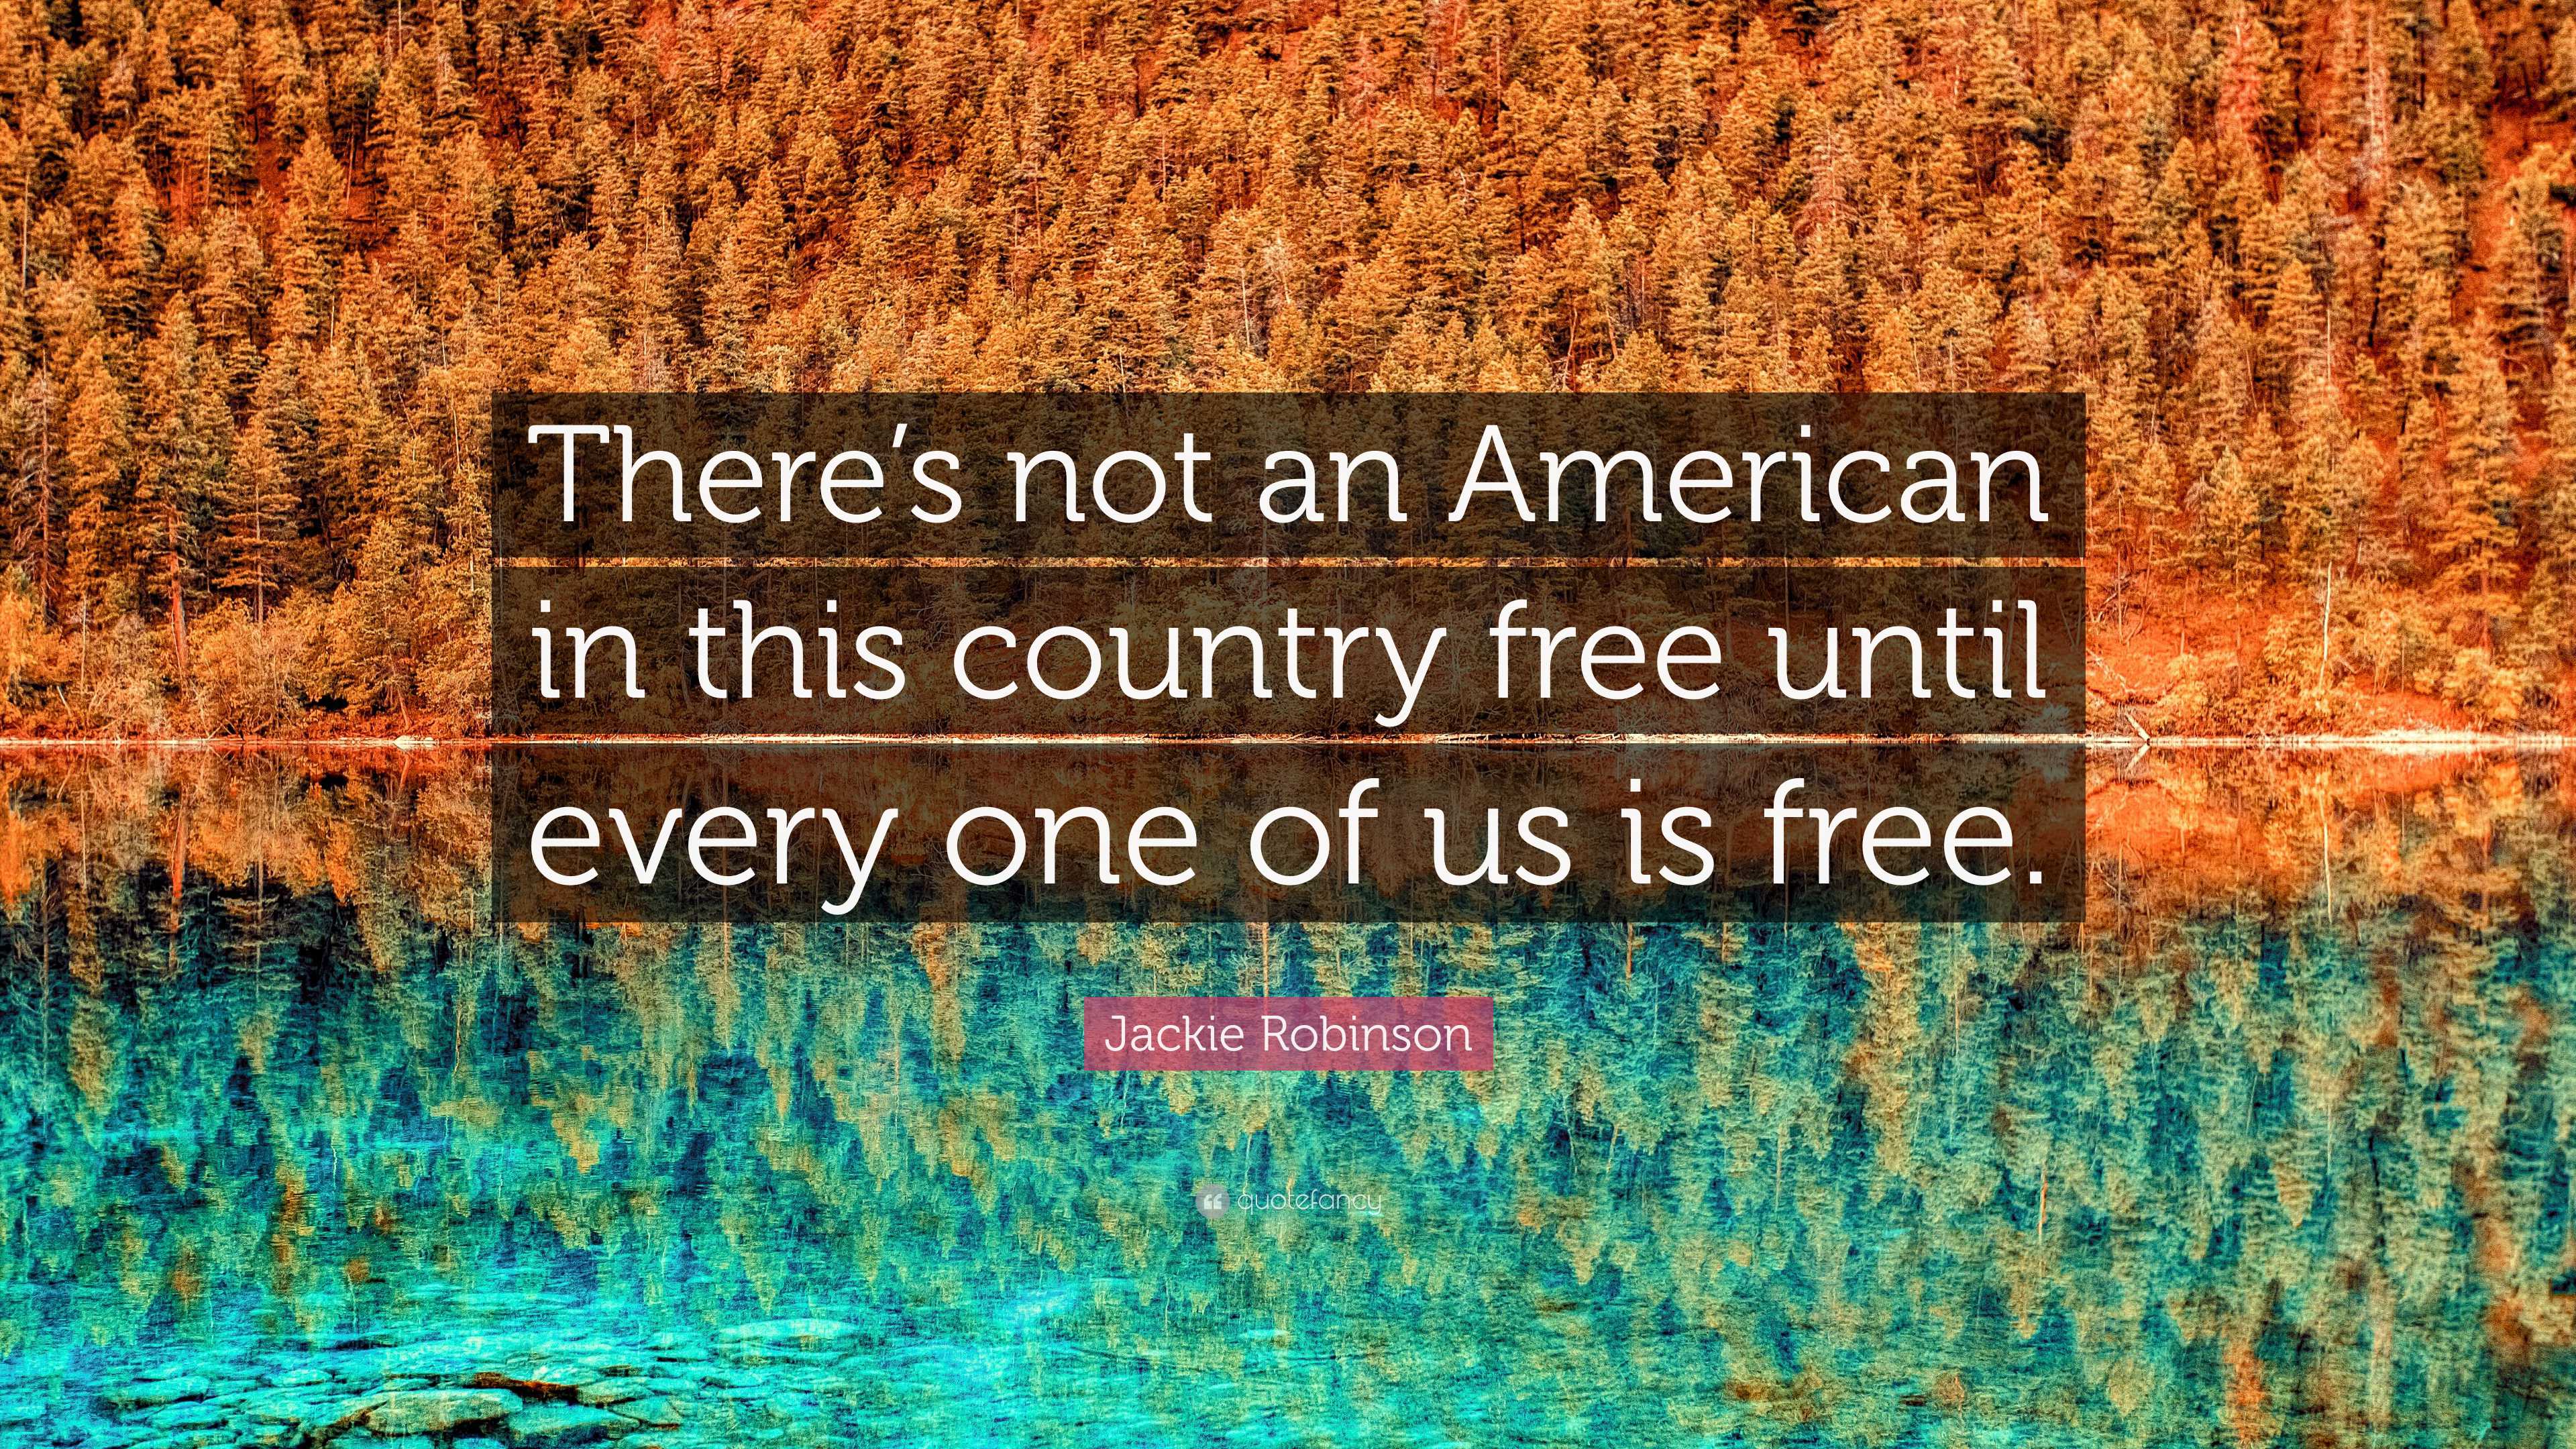 Jackie Robinson - There's not an American in this country